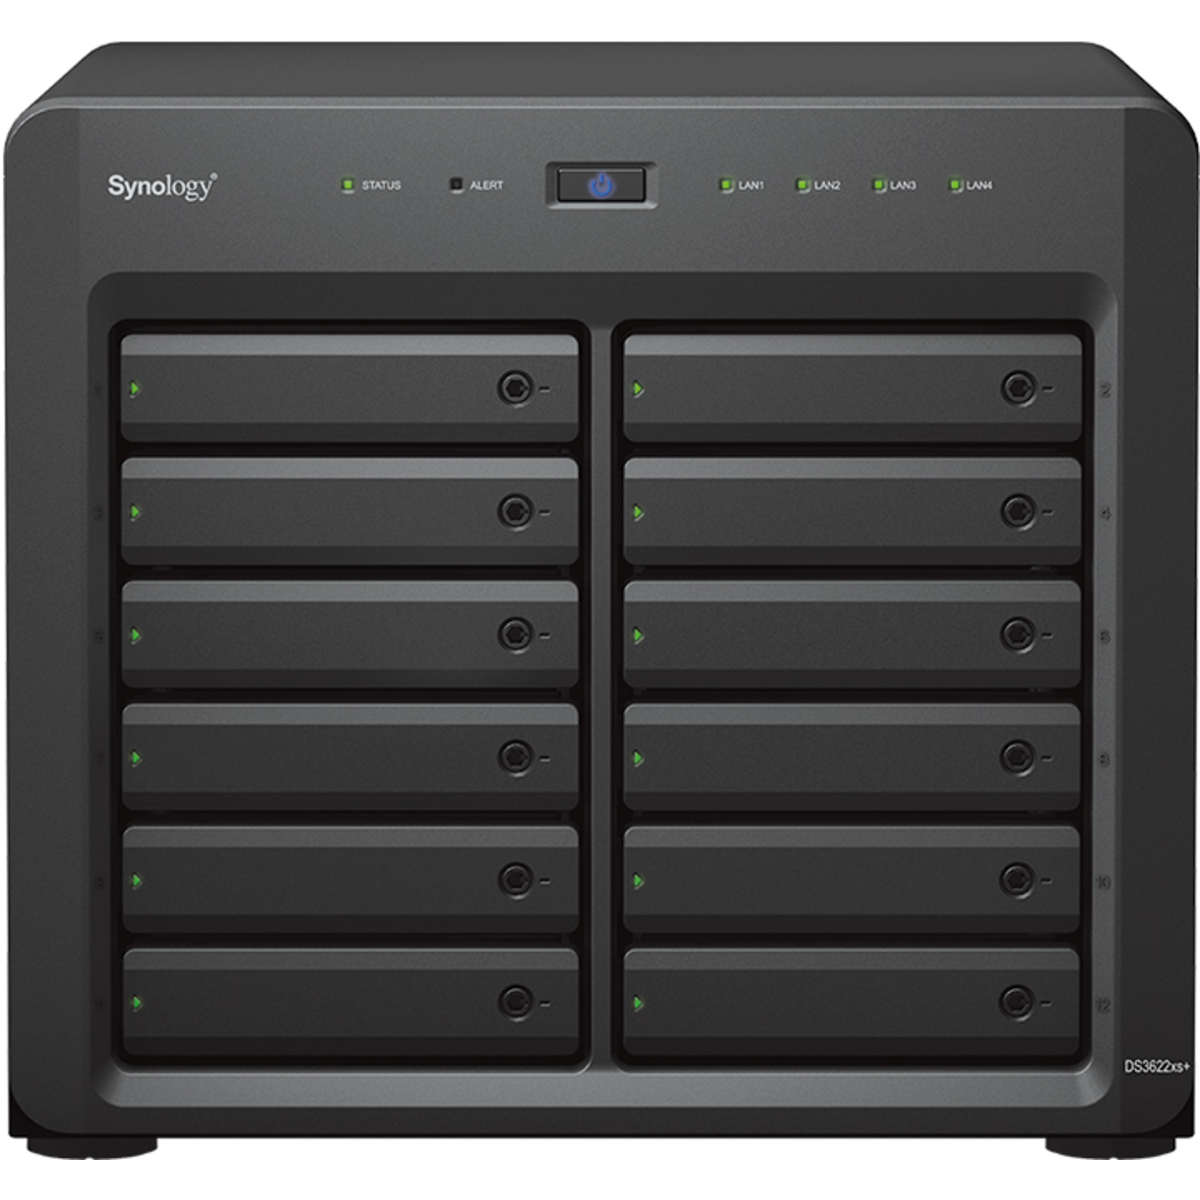 Synology DiskStation DS3622xs+ 9.6tb 12-Bay Desktop Multimedia / Power User / Business NAS - Network Attached Storage Device 10x960gb Synology SAT5210 Series SAT5210-960G 2.5 530/500MB/s SATA 6Gb/s SSD ENTERPRISE Class Drives Installed - Burn-In Tested DiskStation DS3622xs+